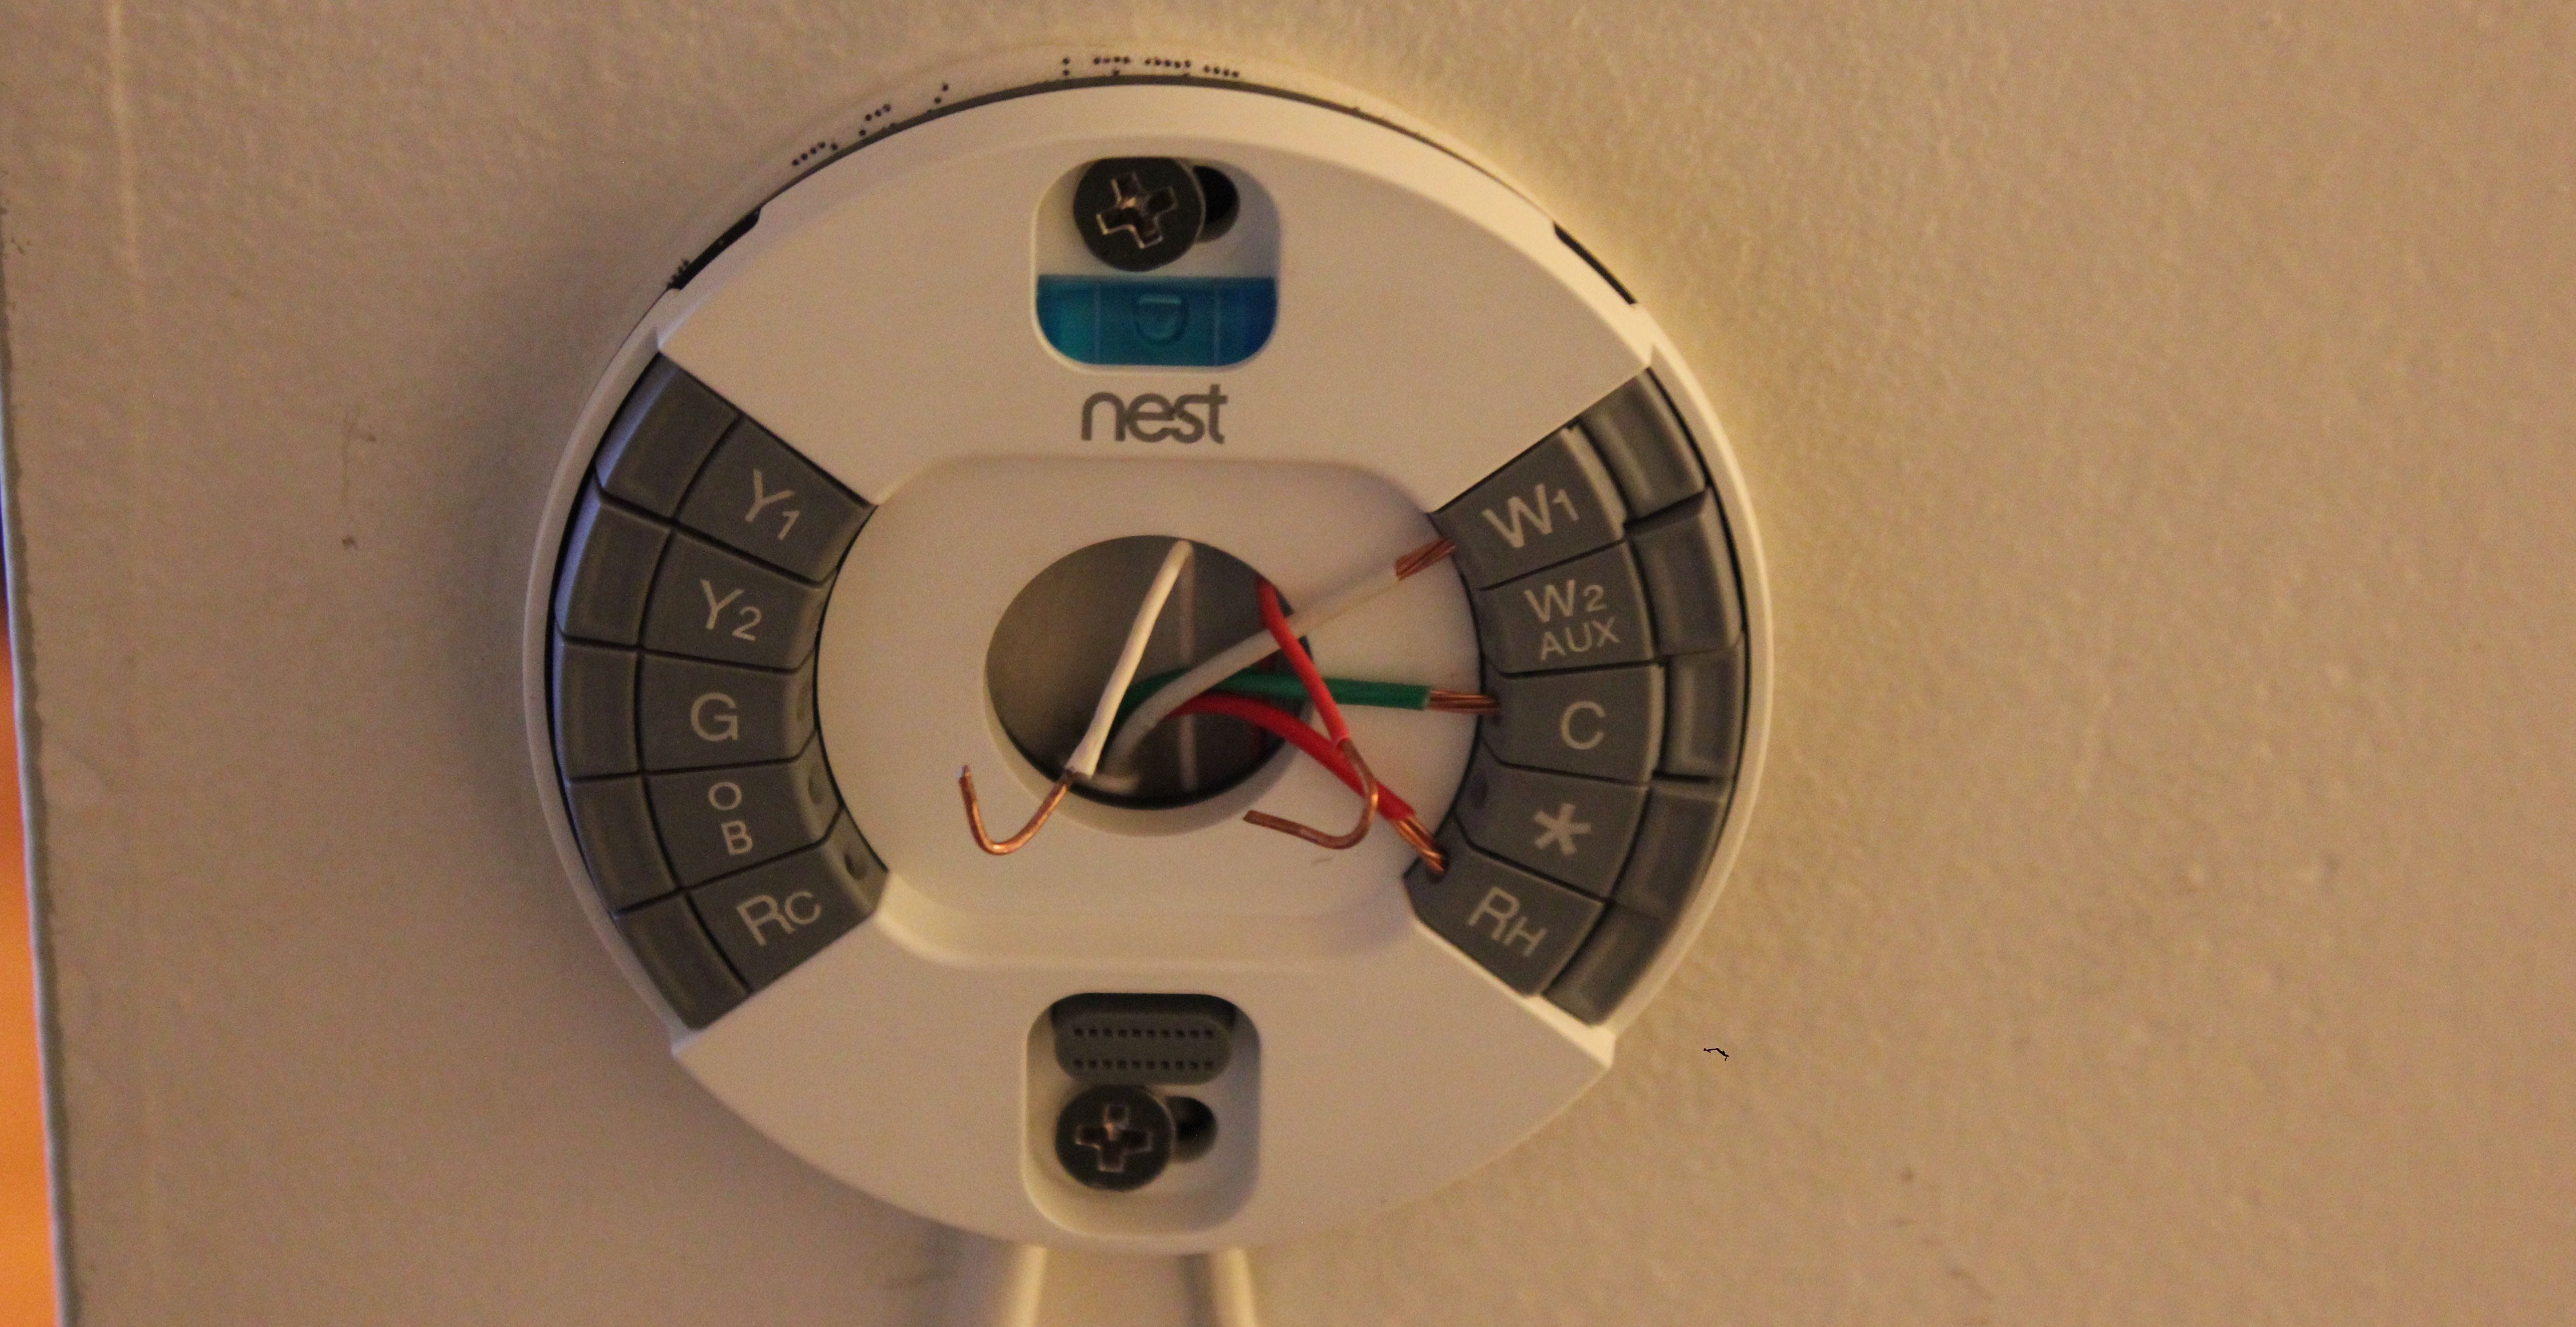 Trying to upgrade to Nest. What is O/B wire & why is white wire in W2/Aux?  : r/Nest